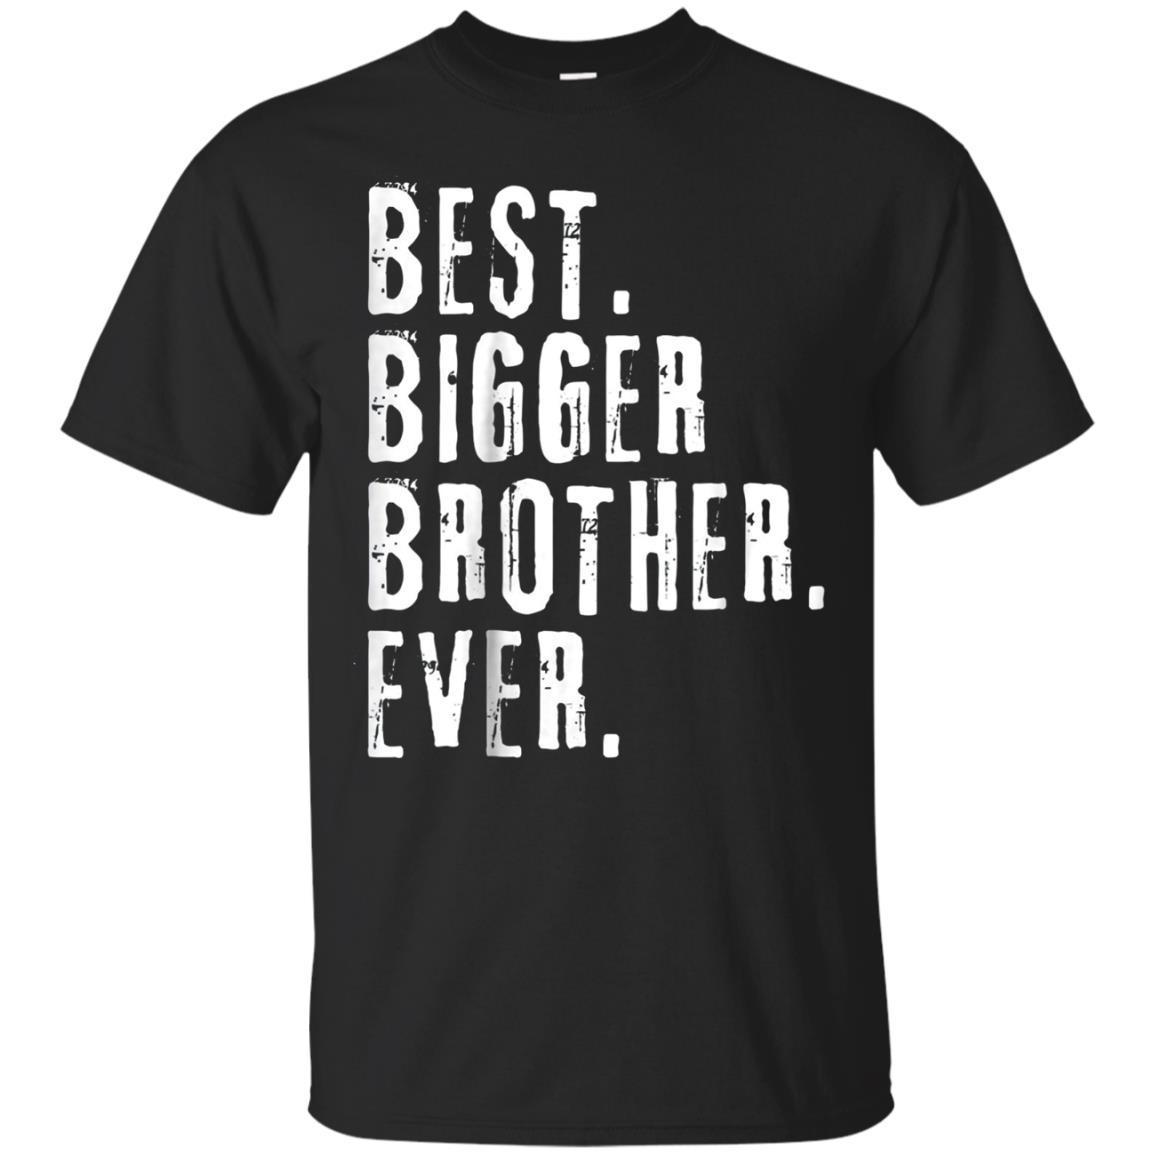 Best Bigger Brother Ever T Shirt Tshirt For Brothers T Shirt Amyna 9983